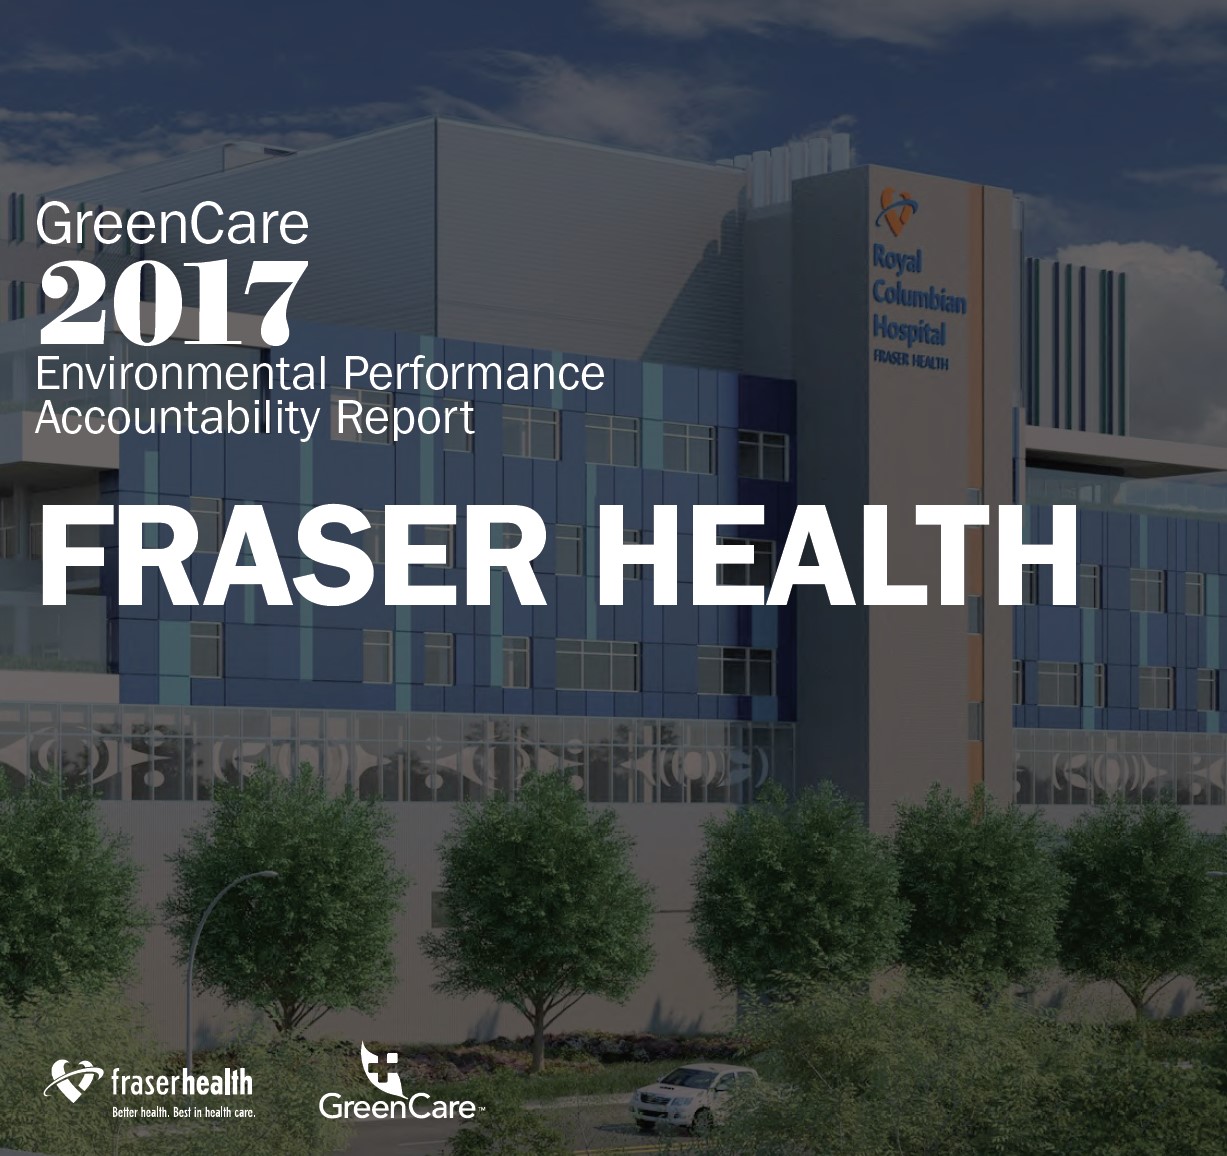 2017 Environmental Performance Accountability Report for Fraser Health